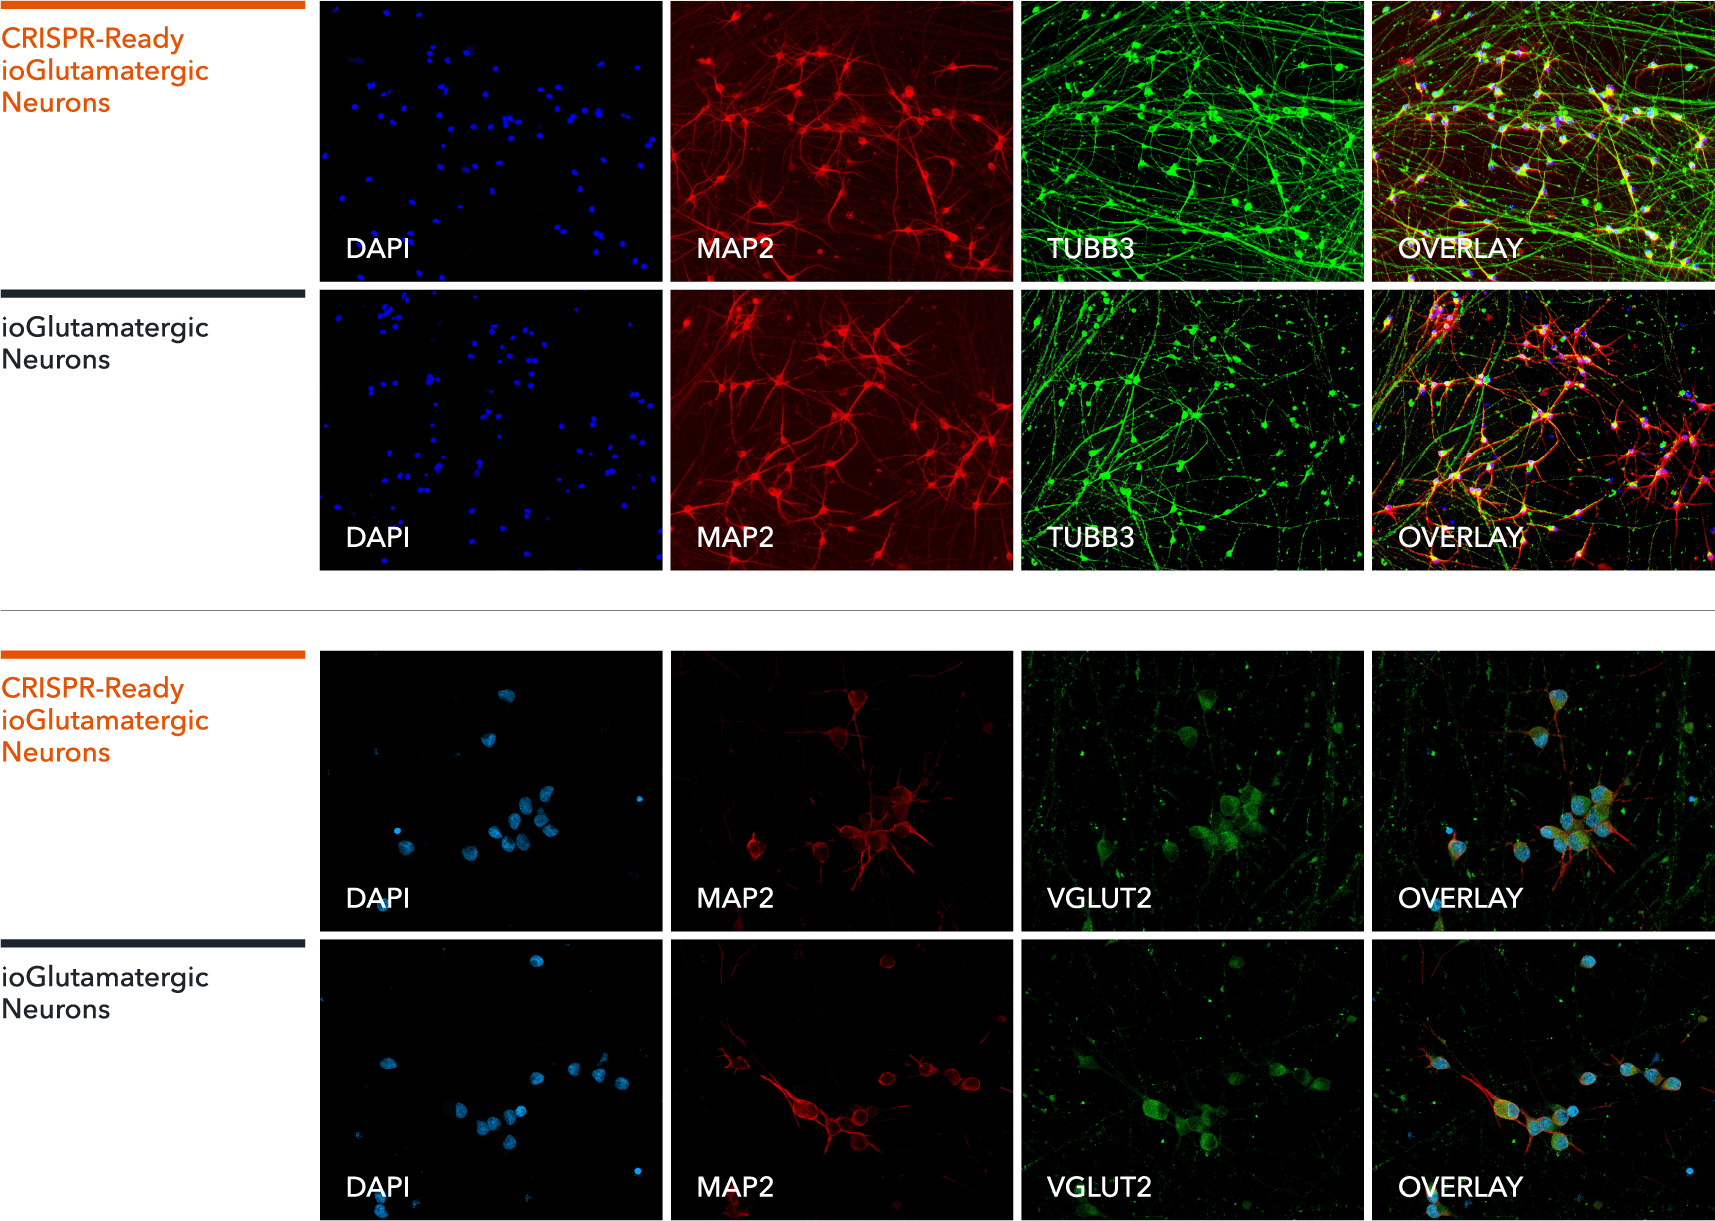 o	ICC shows iPSC-derived CRISPR-ready Glutamatergic Neurons express key neuronal markers MAP2, VGLUT2 and TUBB3